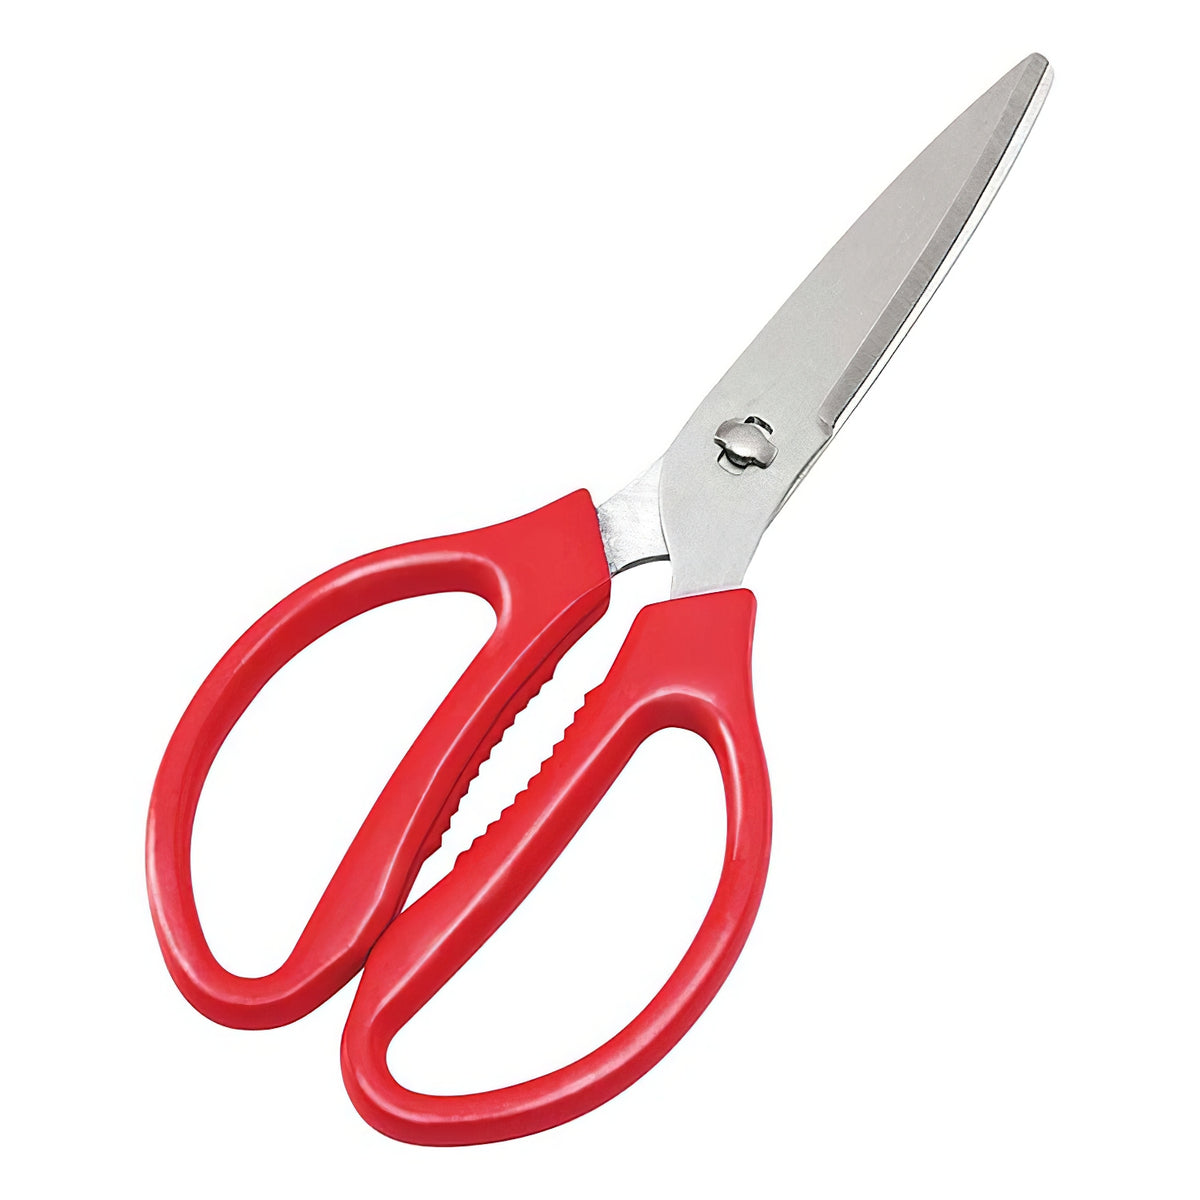 Household scissors stainless and high quality